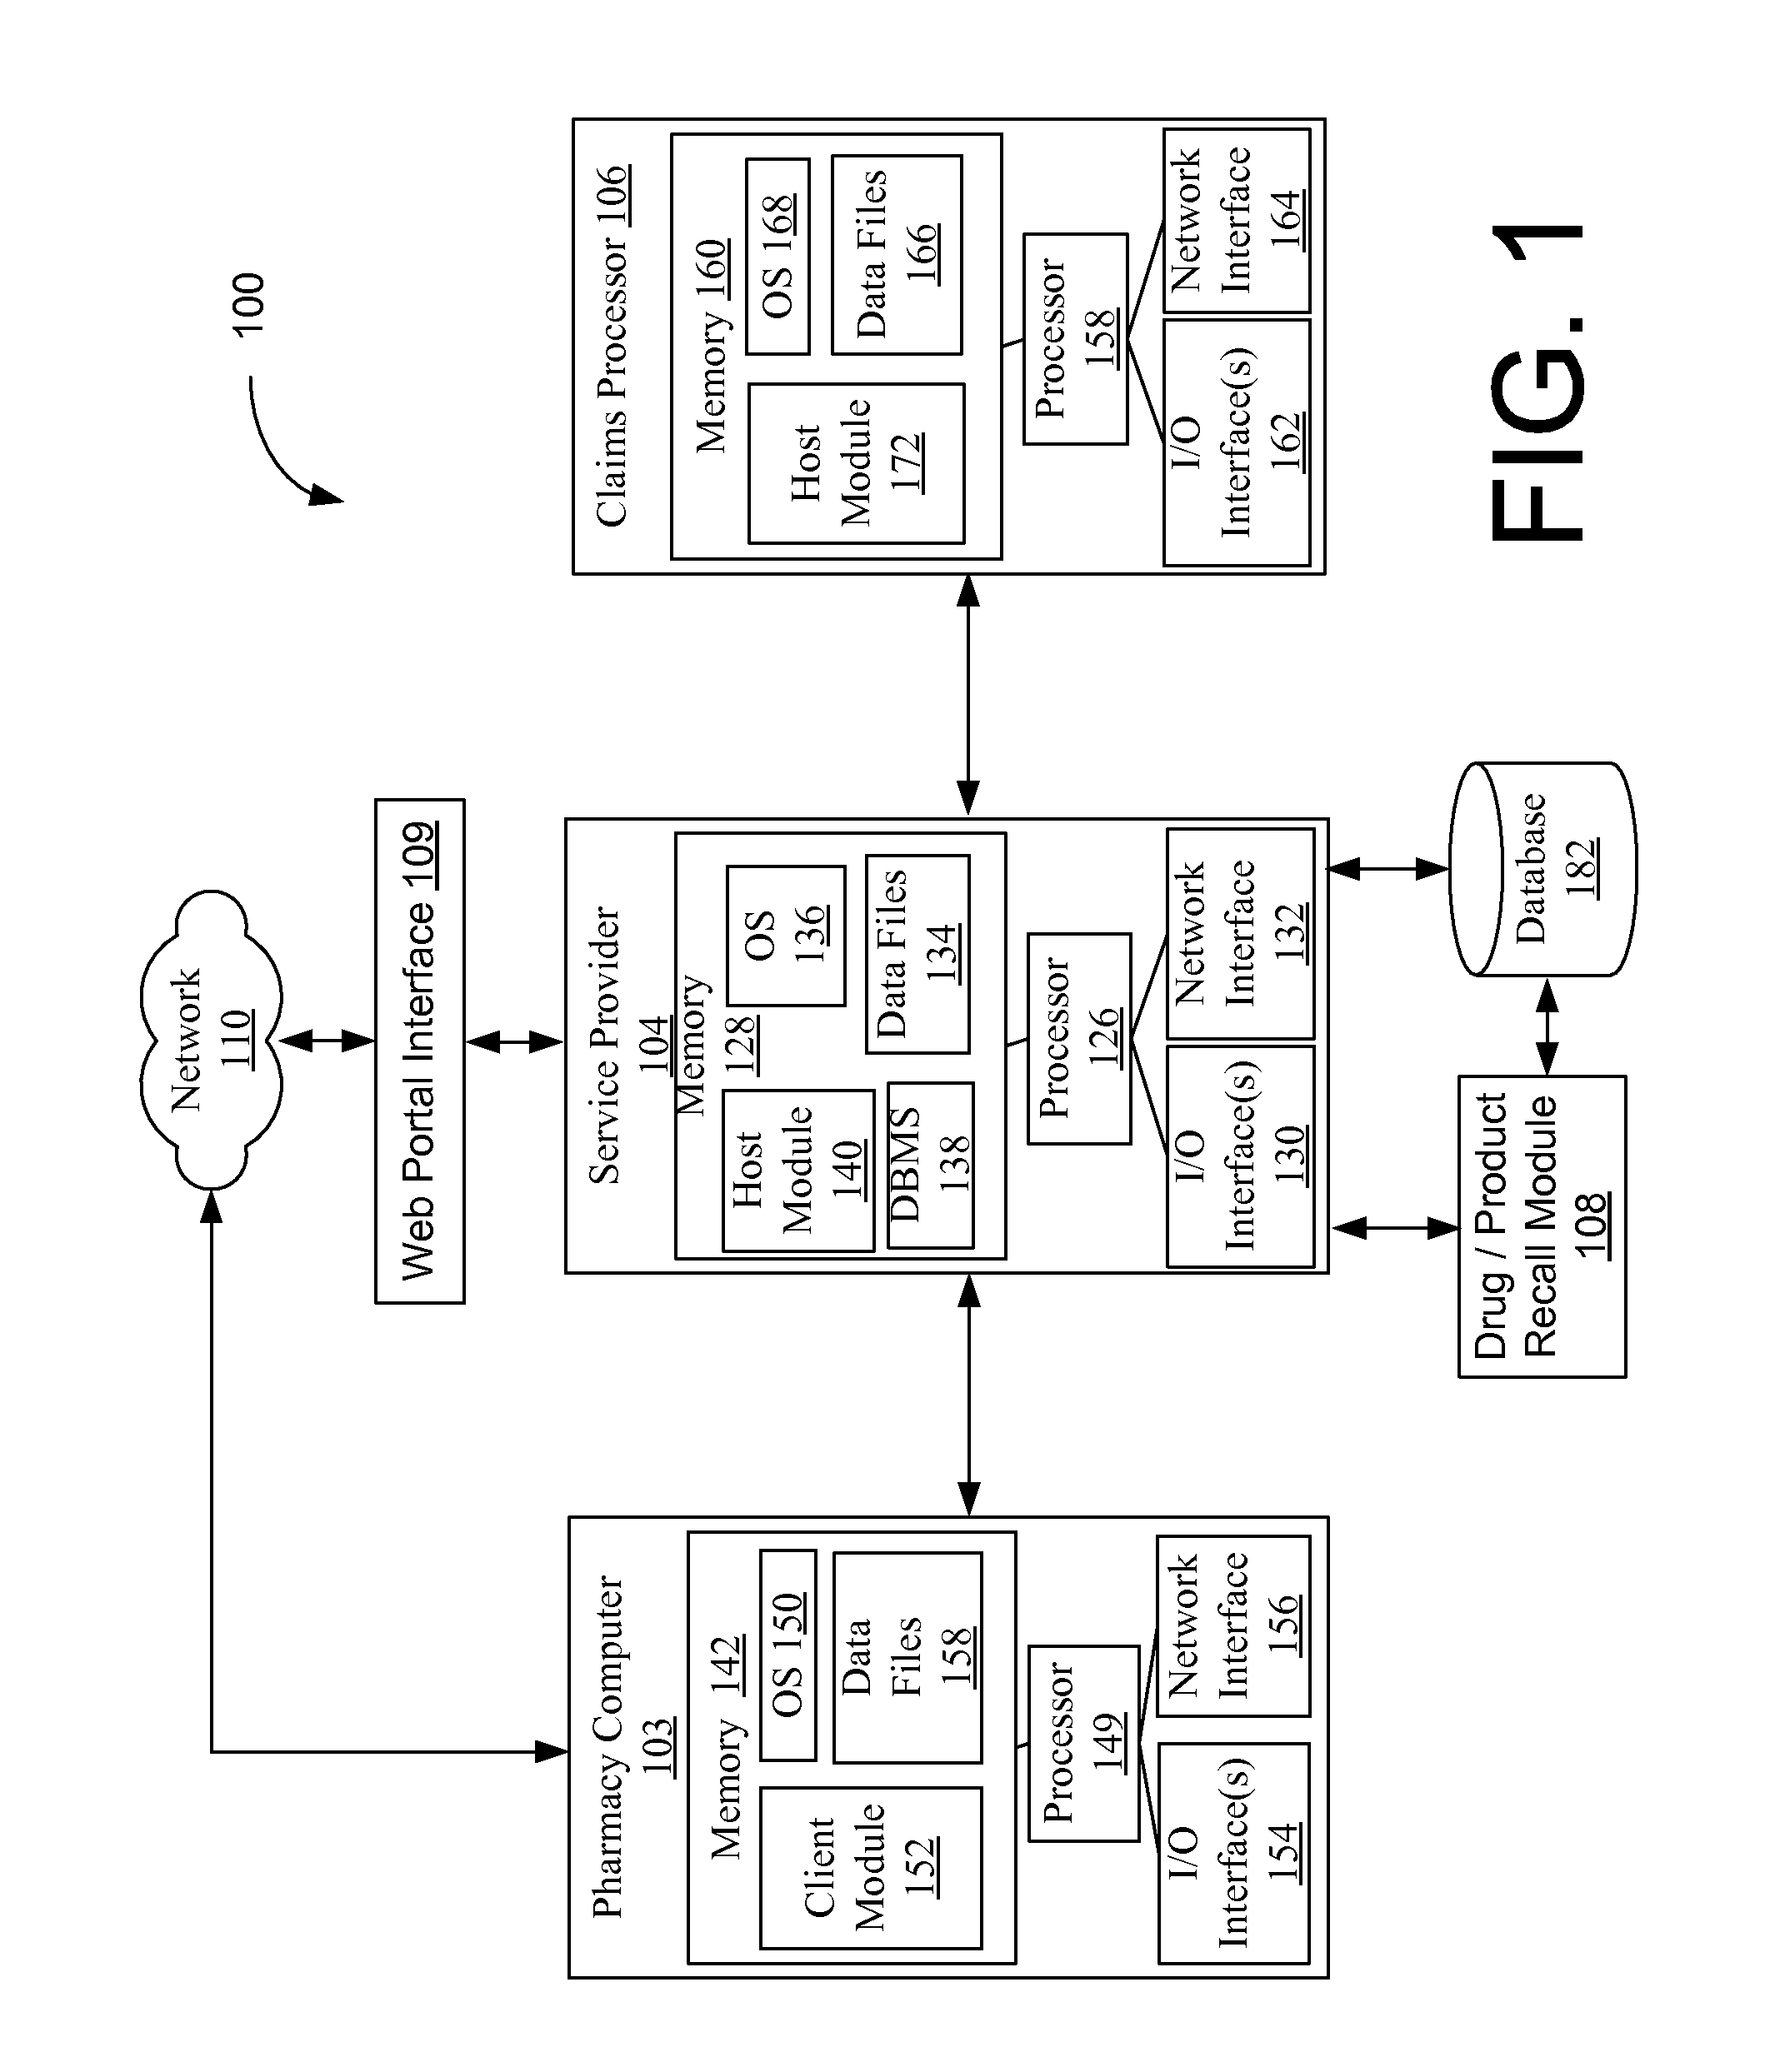 Systems and methods for supporting drug or product recalls